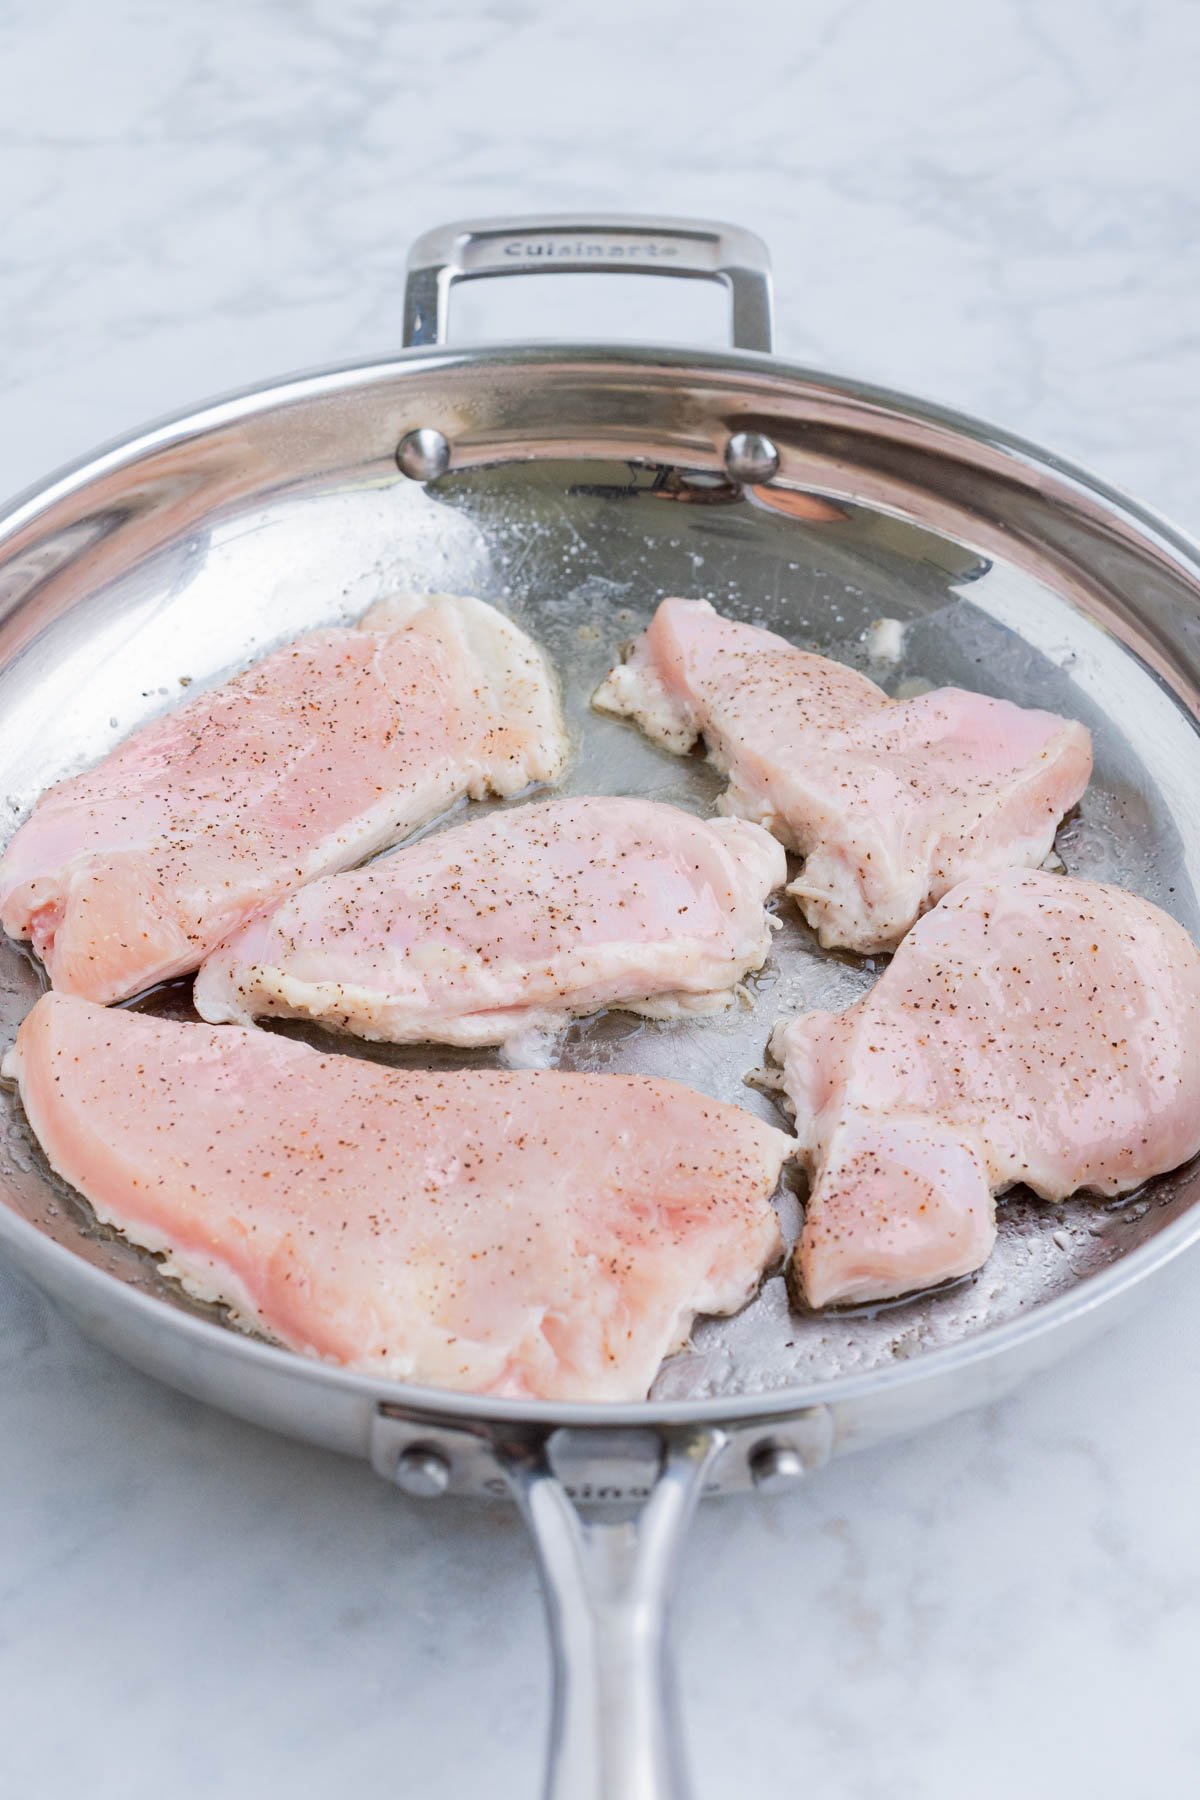 Prepared chicken is seared in a skillet.